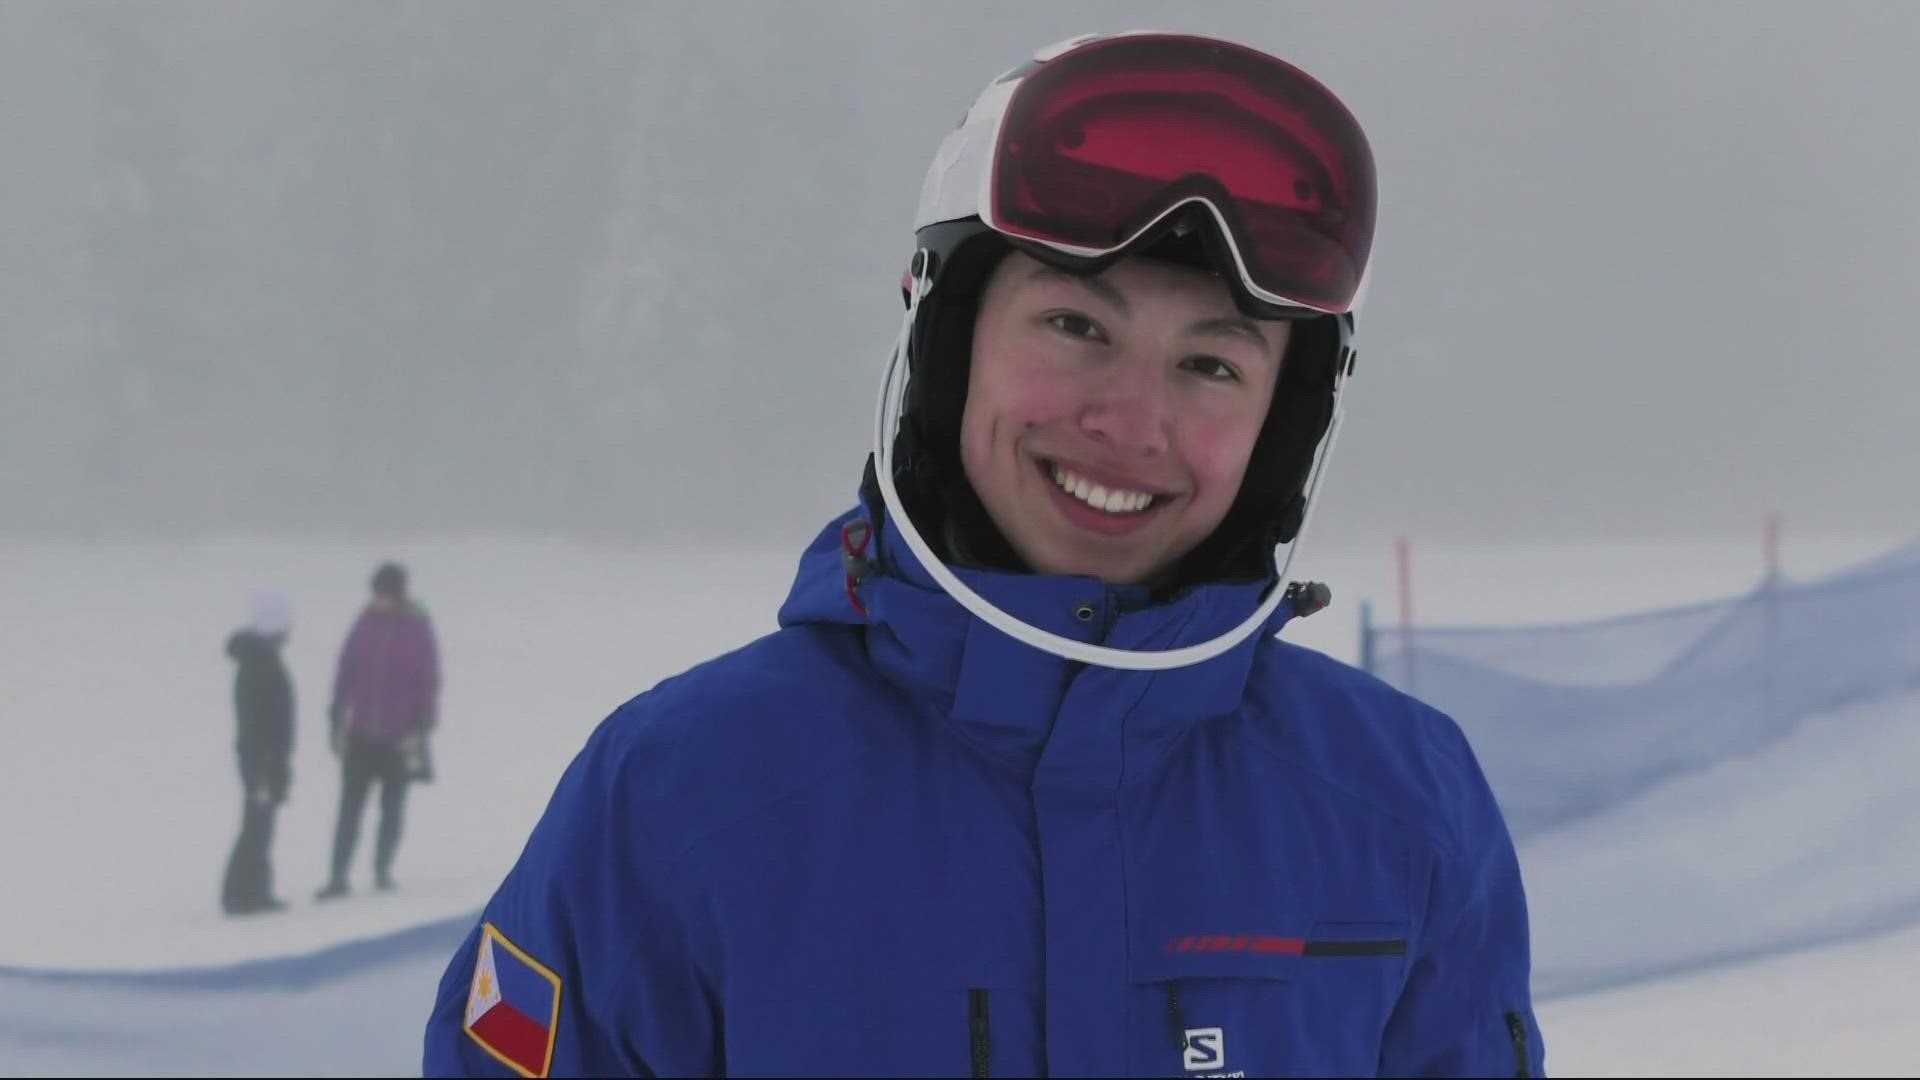 Asa Miller, who graduated from Lincoln High School, will compete in slalom and giant slalom in Beijing.